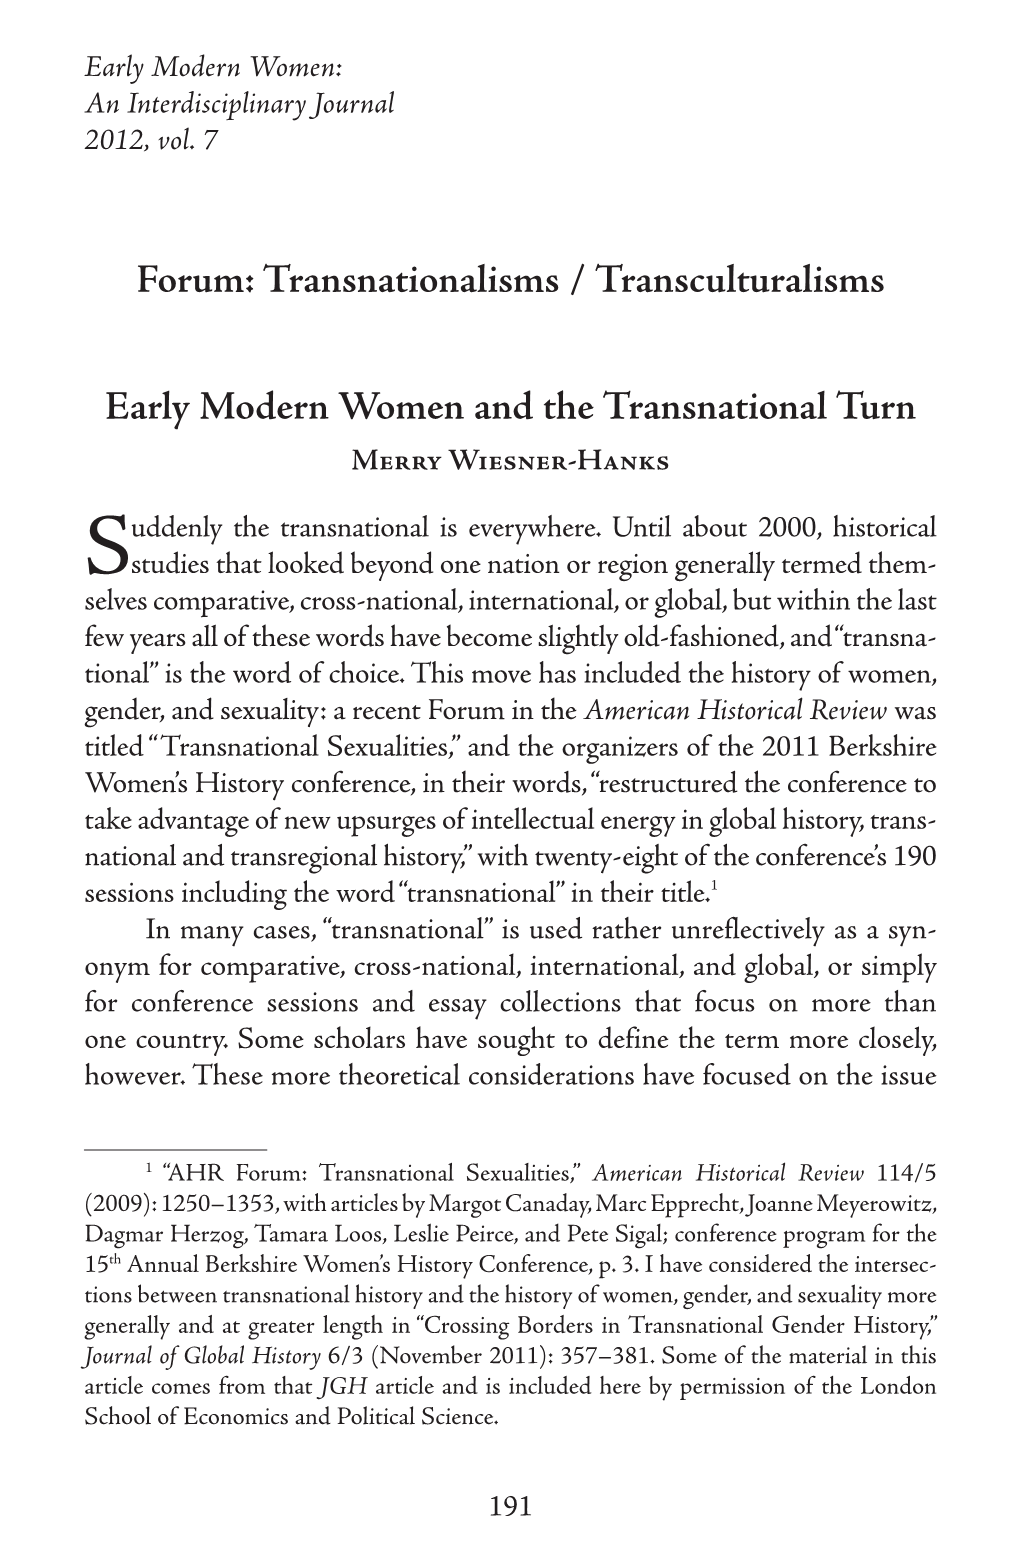 Forum: Transnationalisms / Transculturalisms Early Modern Women and the Transnational Turn